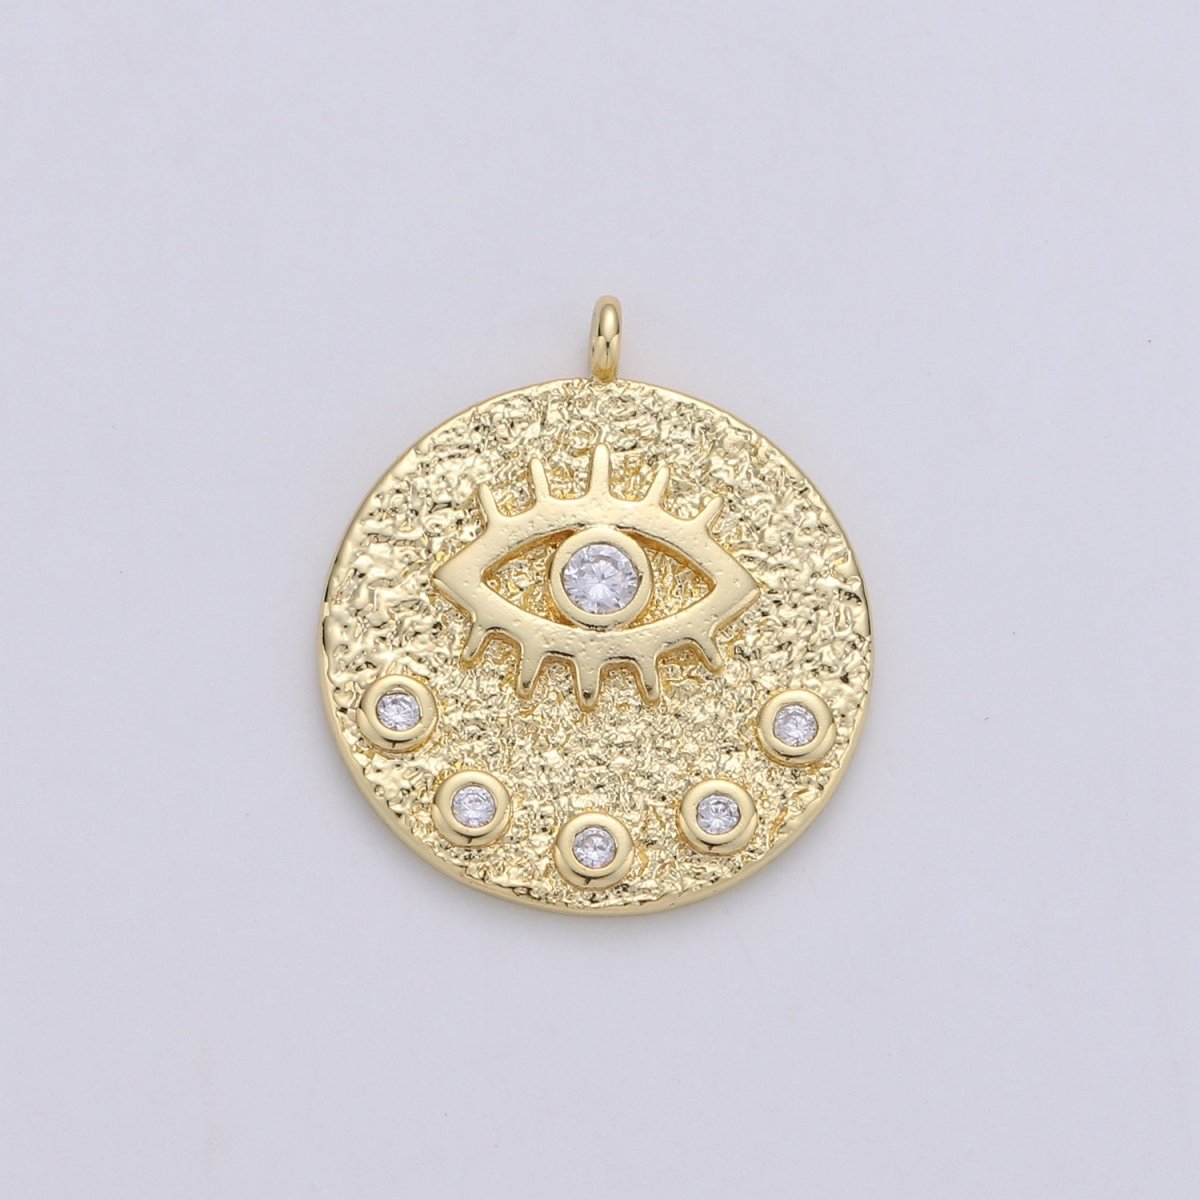 24K Gold Filled Rustic Dainty Evil Eye Charm with Micro Pave Cubic Zirconia CZ Stone for Peaceful Spiritual Necklace or Bracelet, C-928 - DLUXCA